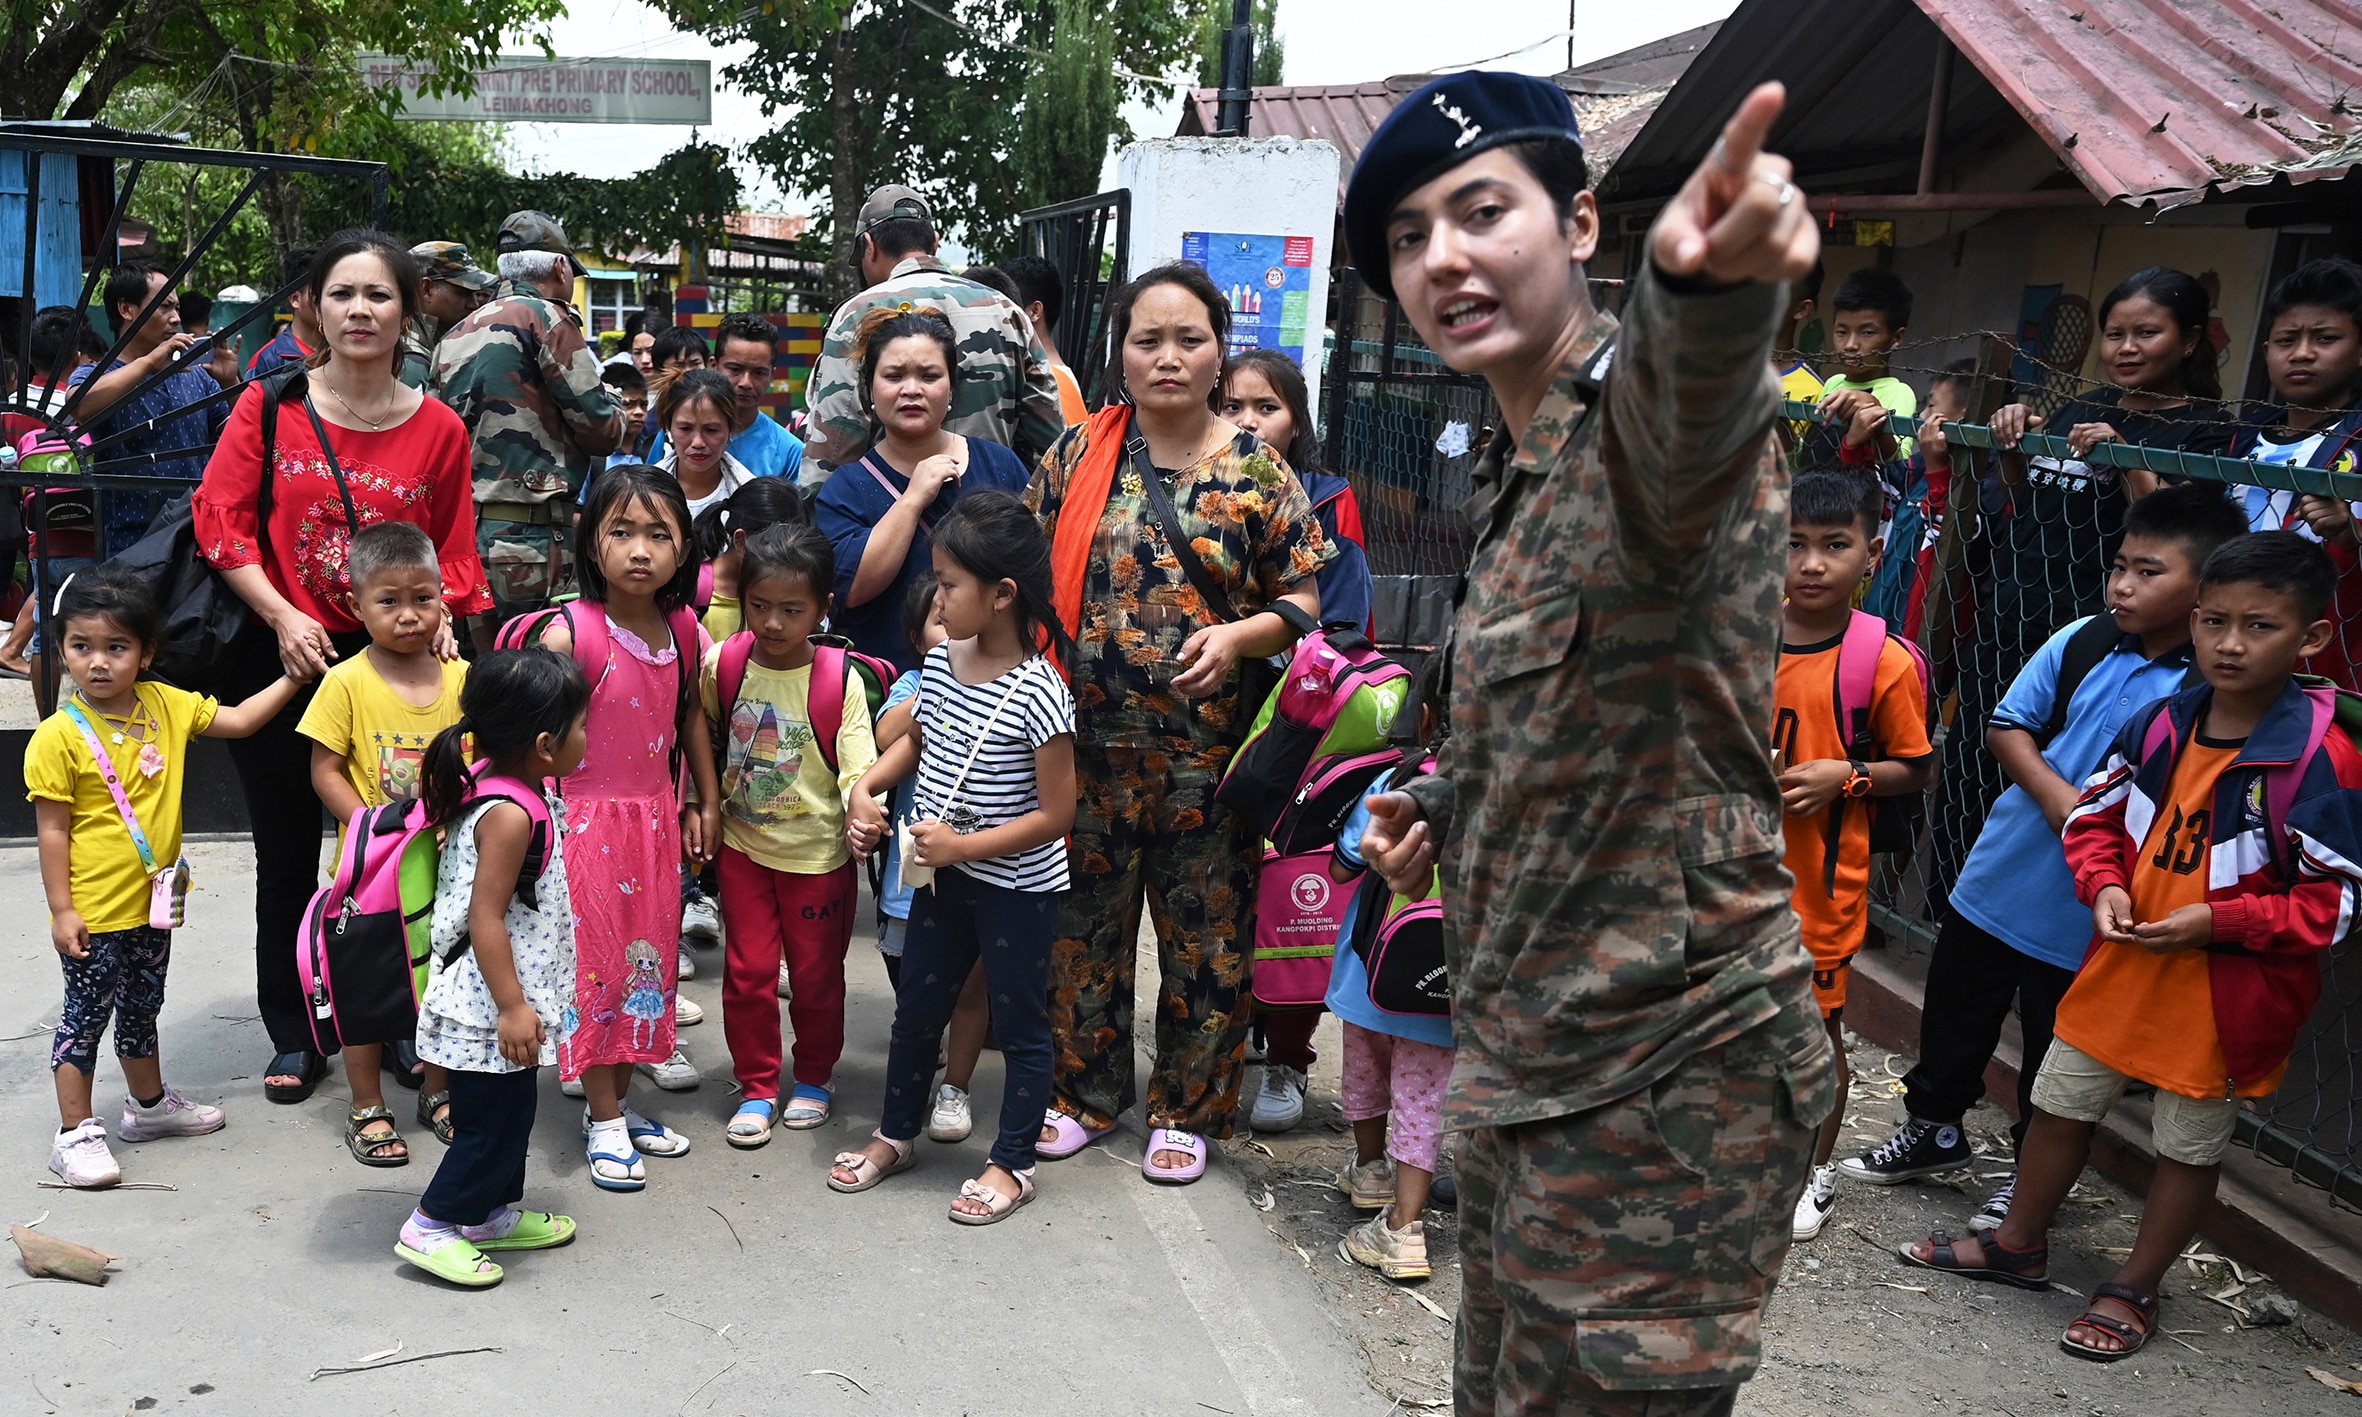 MANIPUR: An Indian army personnel gestures as children evacuated by the Indian army during the ethnic riots in Manipur state prepare to leave after reuniting with their parents at a temporary shelter at the Leimakhong Army Cantonment in the northeastern Indian state of Manipur on May 10, 2023. – AFP